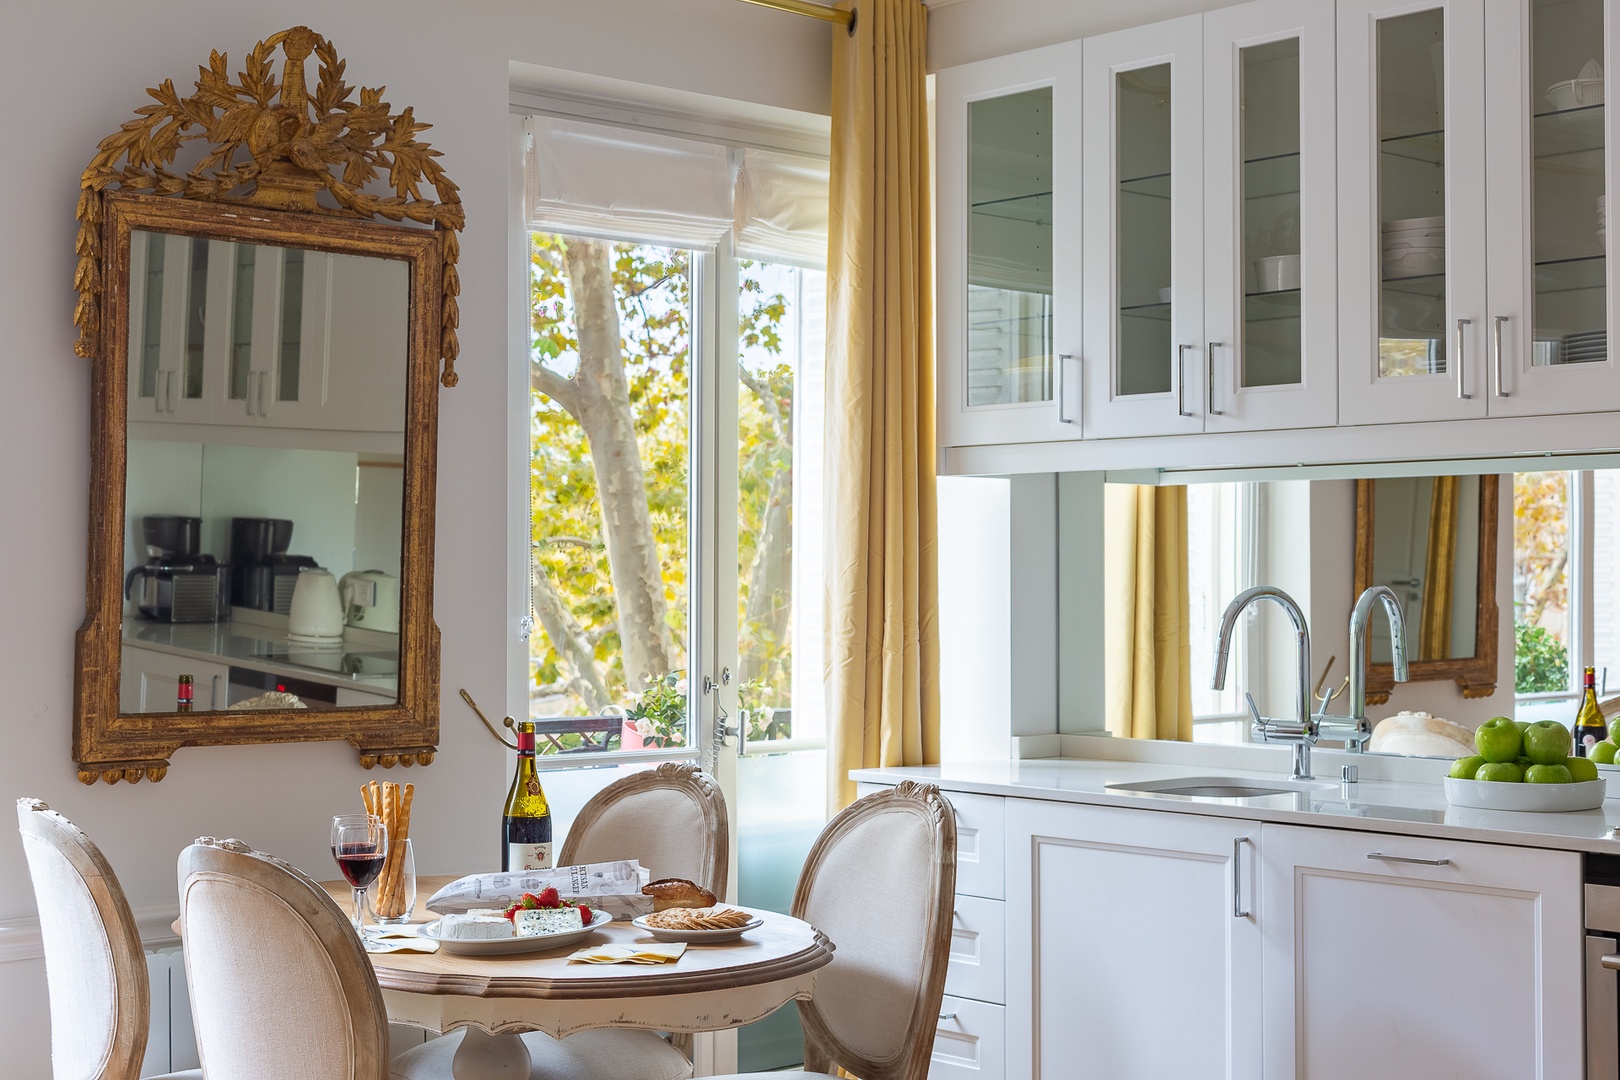 Open the French doors to enjoy views of the Champ de Mars!